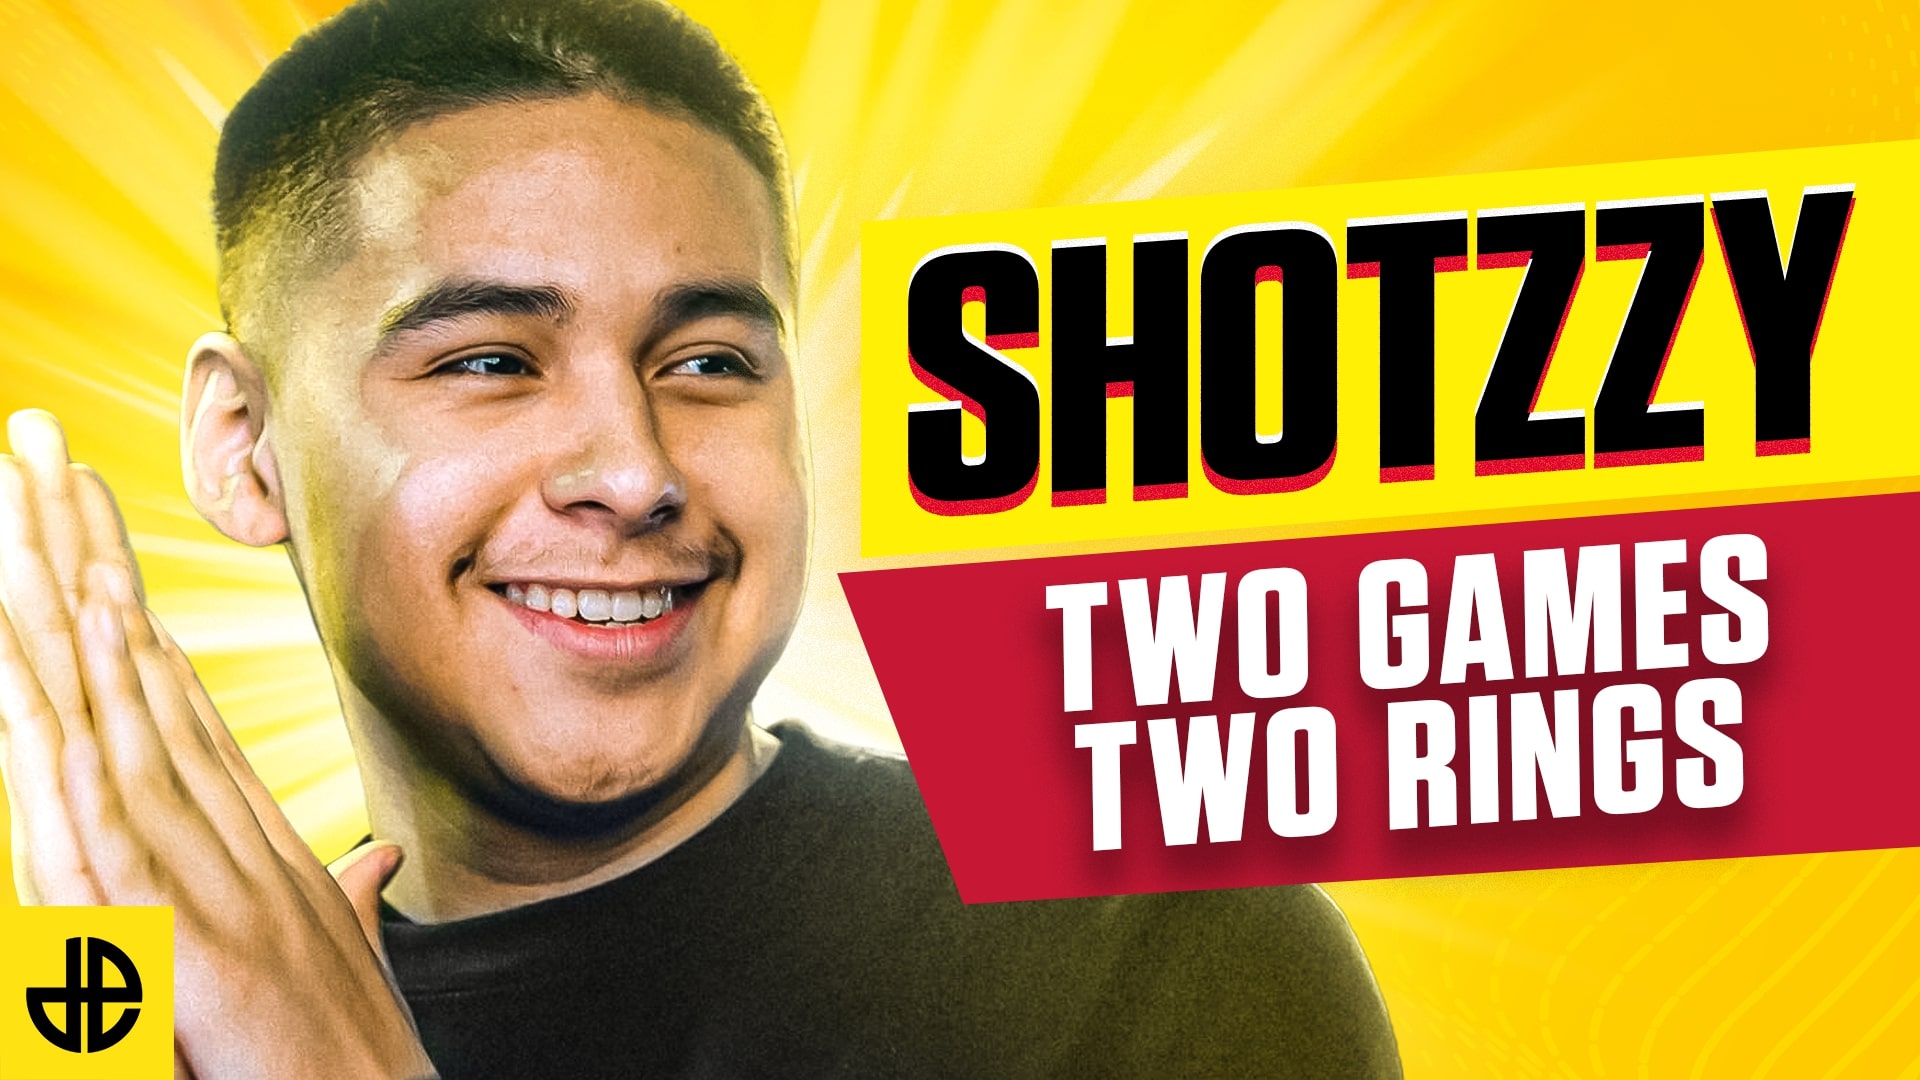 Two Games, Two Rings: How Shotzzy became esports’ biggest success story